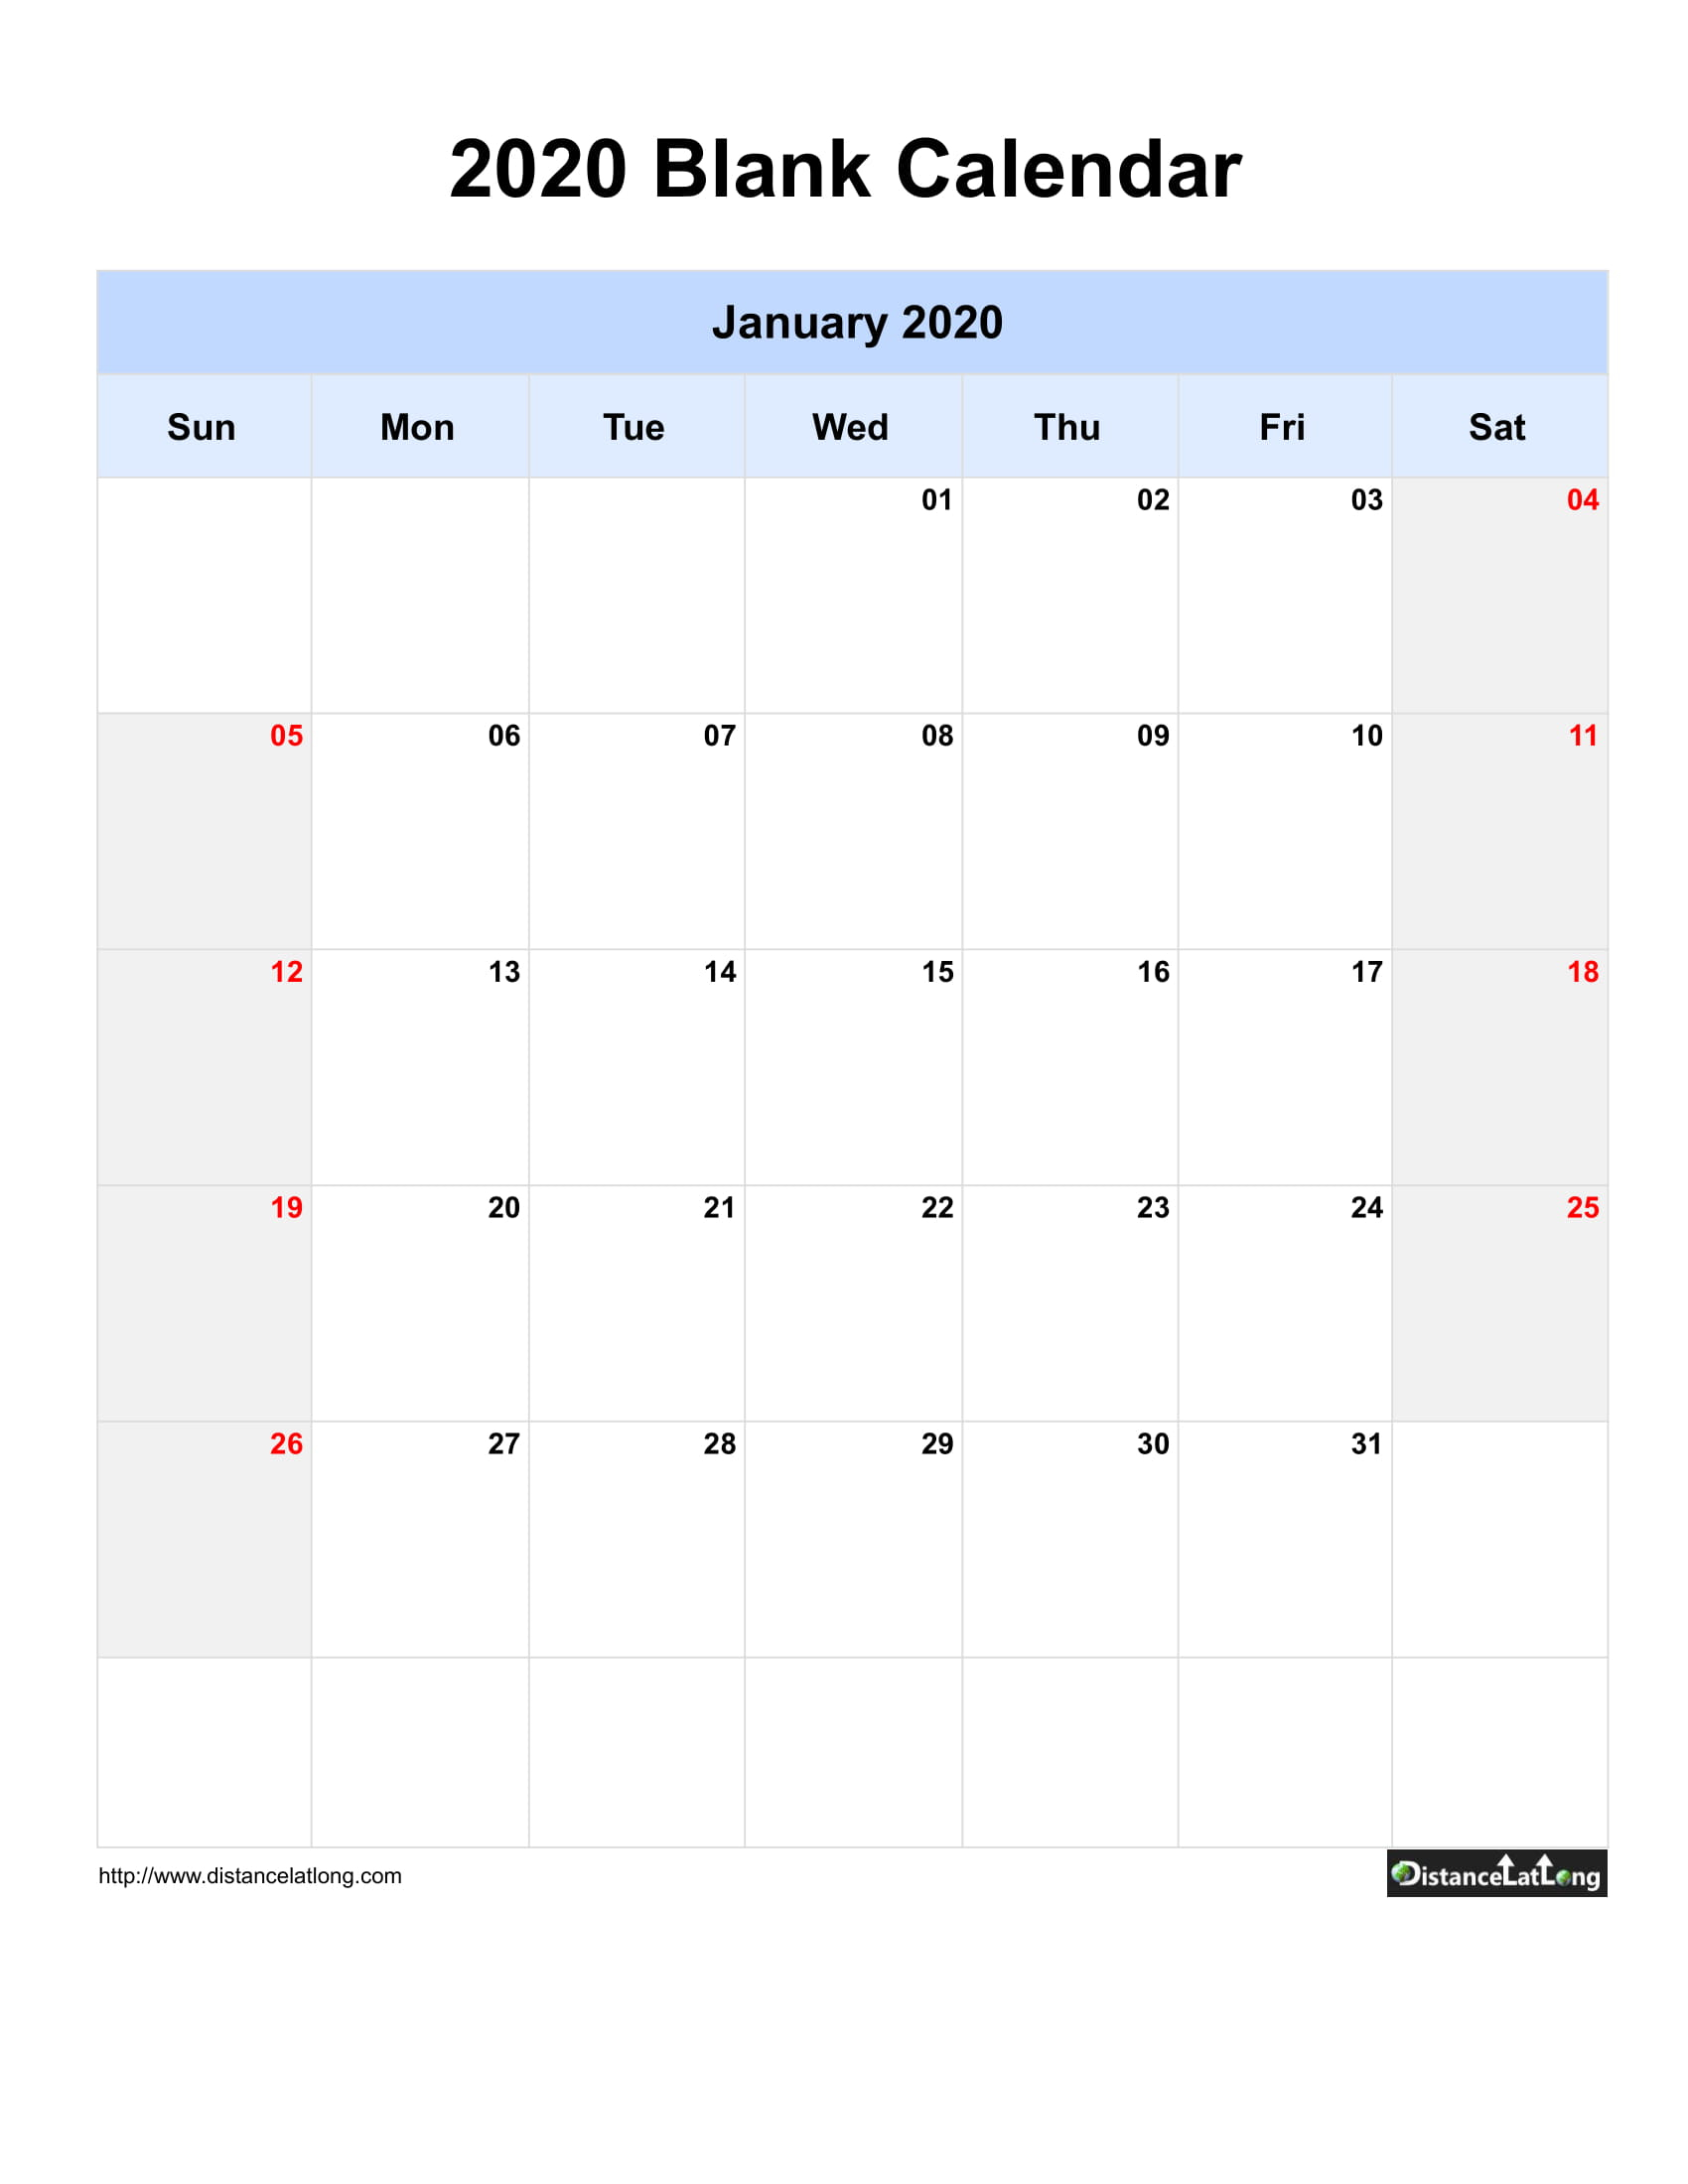 January Calendars For Pdf, Words And Jpg Formats